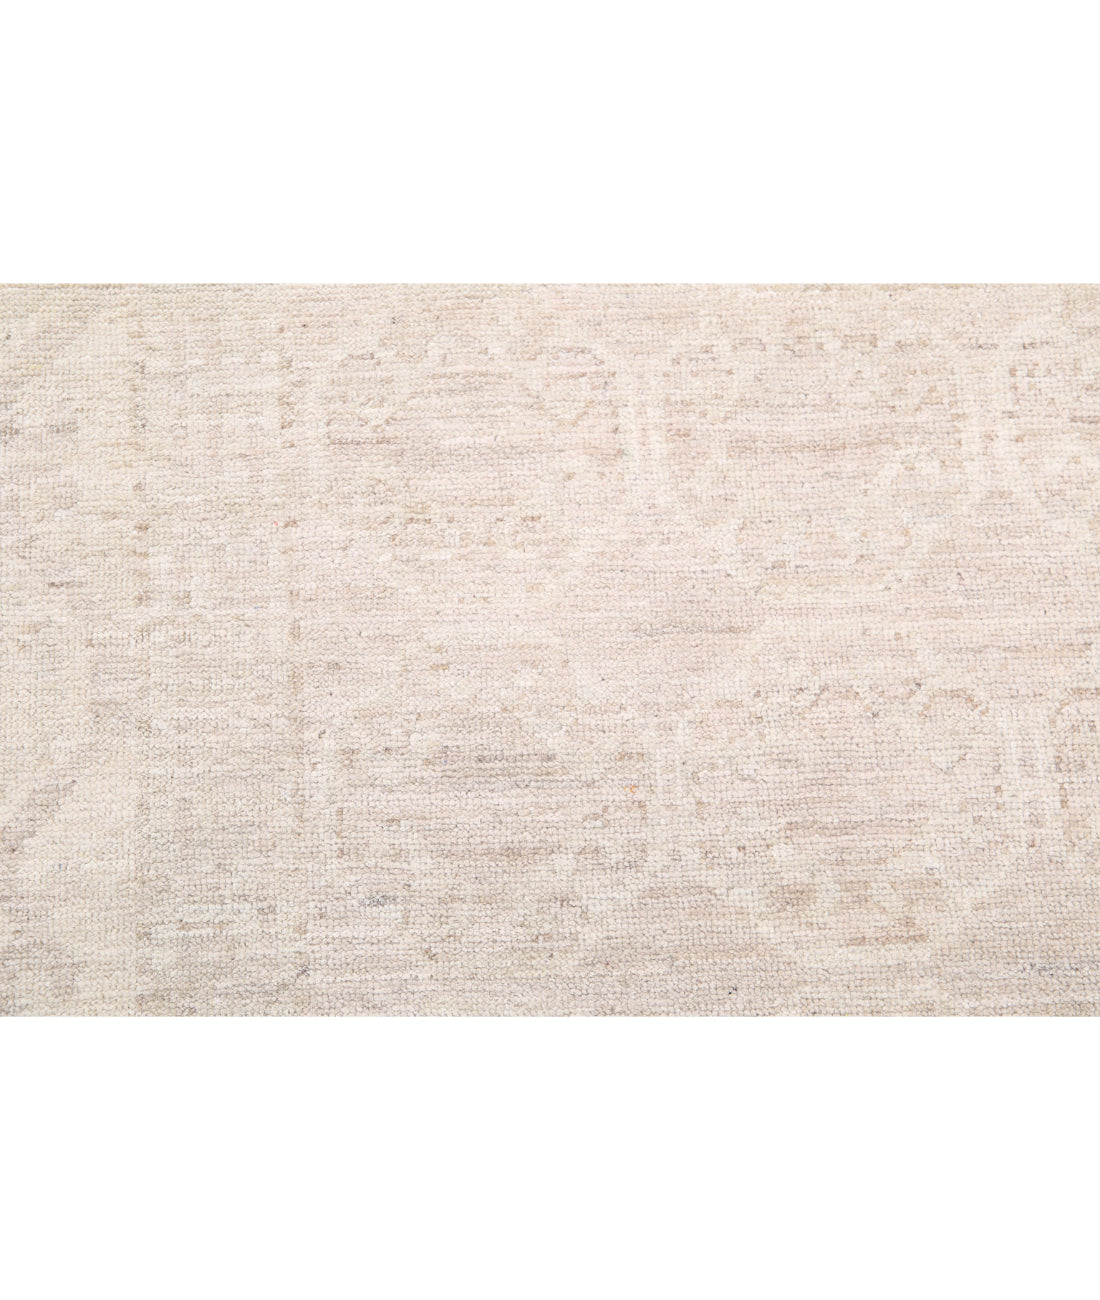 Hand Knotted Khotan Wool Rug - 8'4'' x 11'4'' 8'4'' x 11'4'' (250 X 340) / Taupe / Ivory